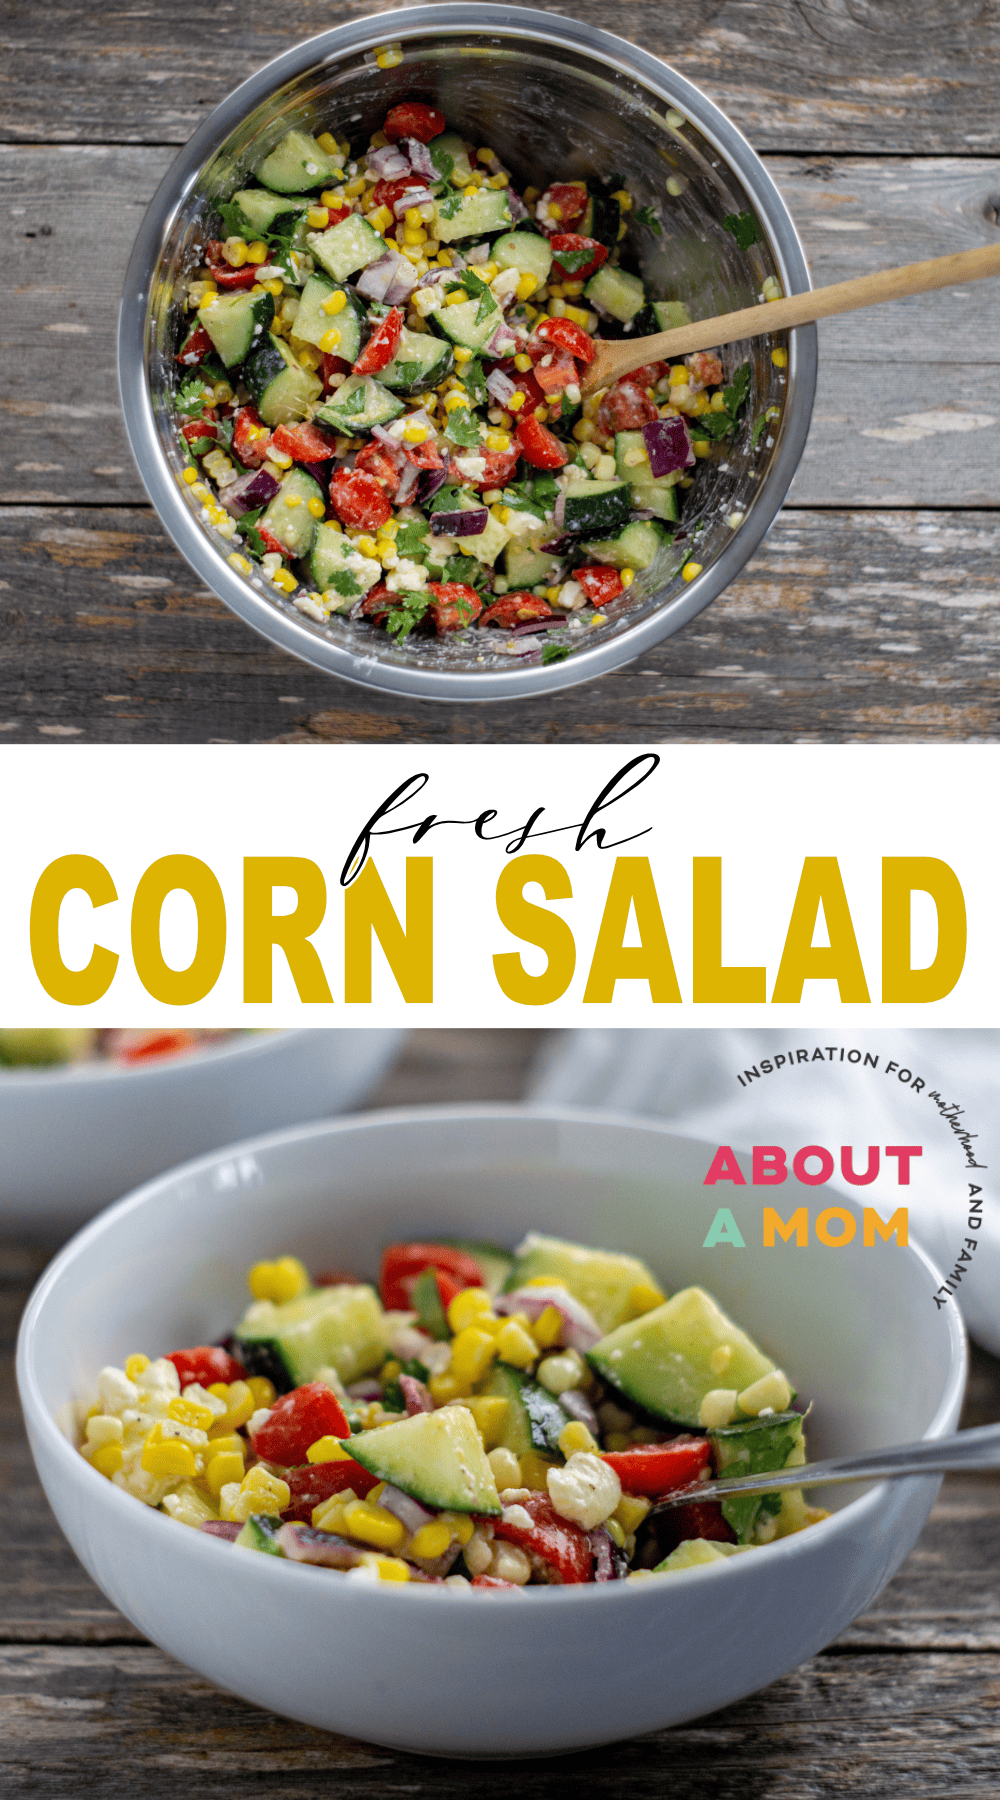 This Fresh Corn Salad recipe is full of flavor with fresh-from-the-cob corn, tomatoes, cucumber, red onion, feta cheese, a simple homemade vinaigrette and more.  Serve this Fresh Corn Salad as a summer lunch or a delicious side dish alongside your favorite BBQ!